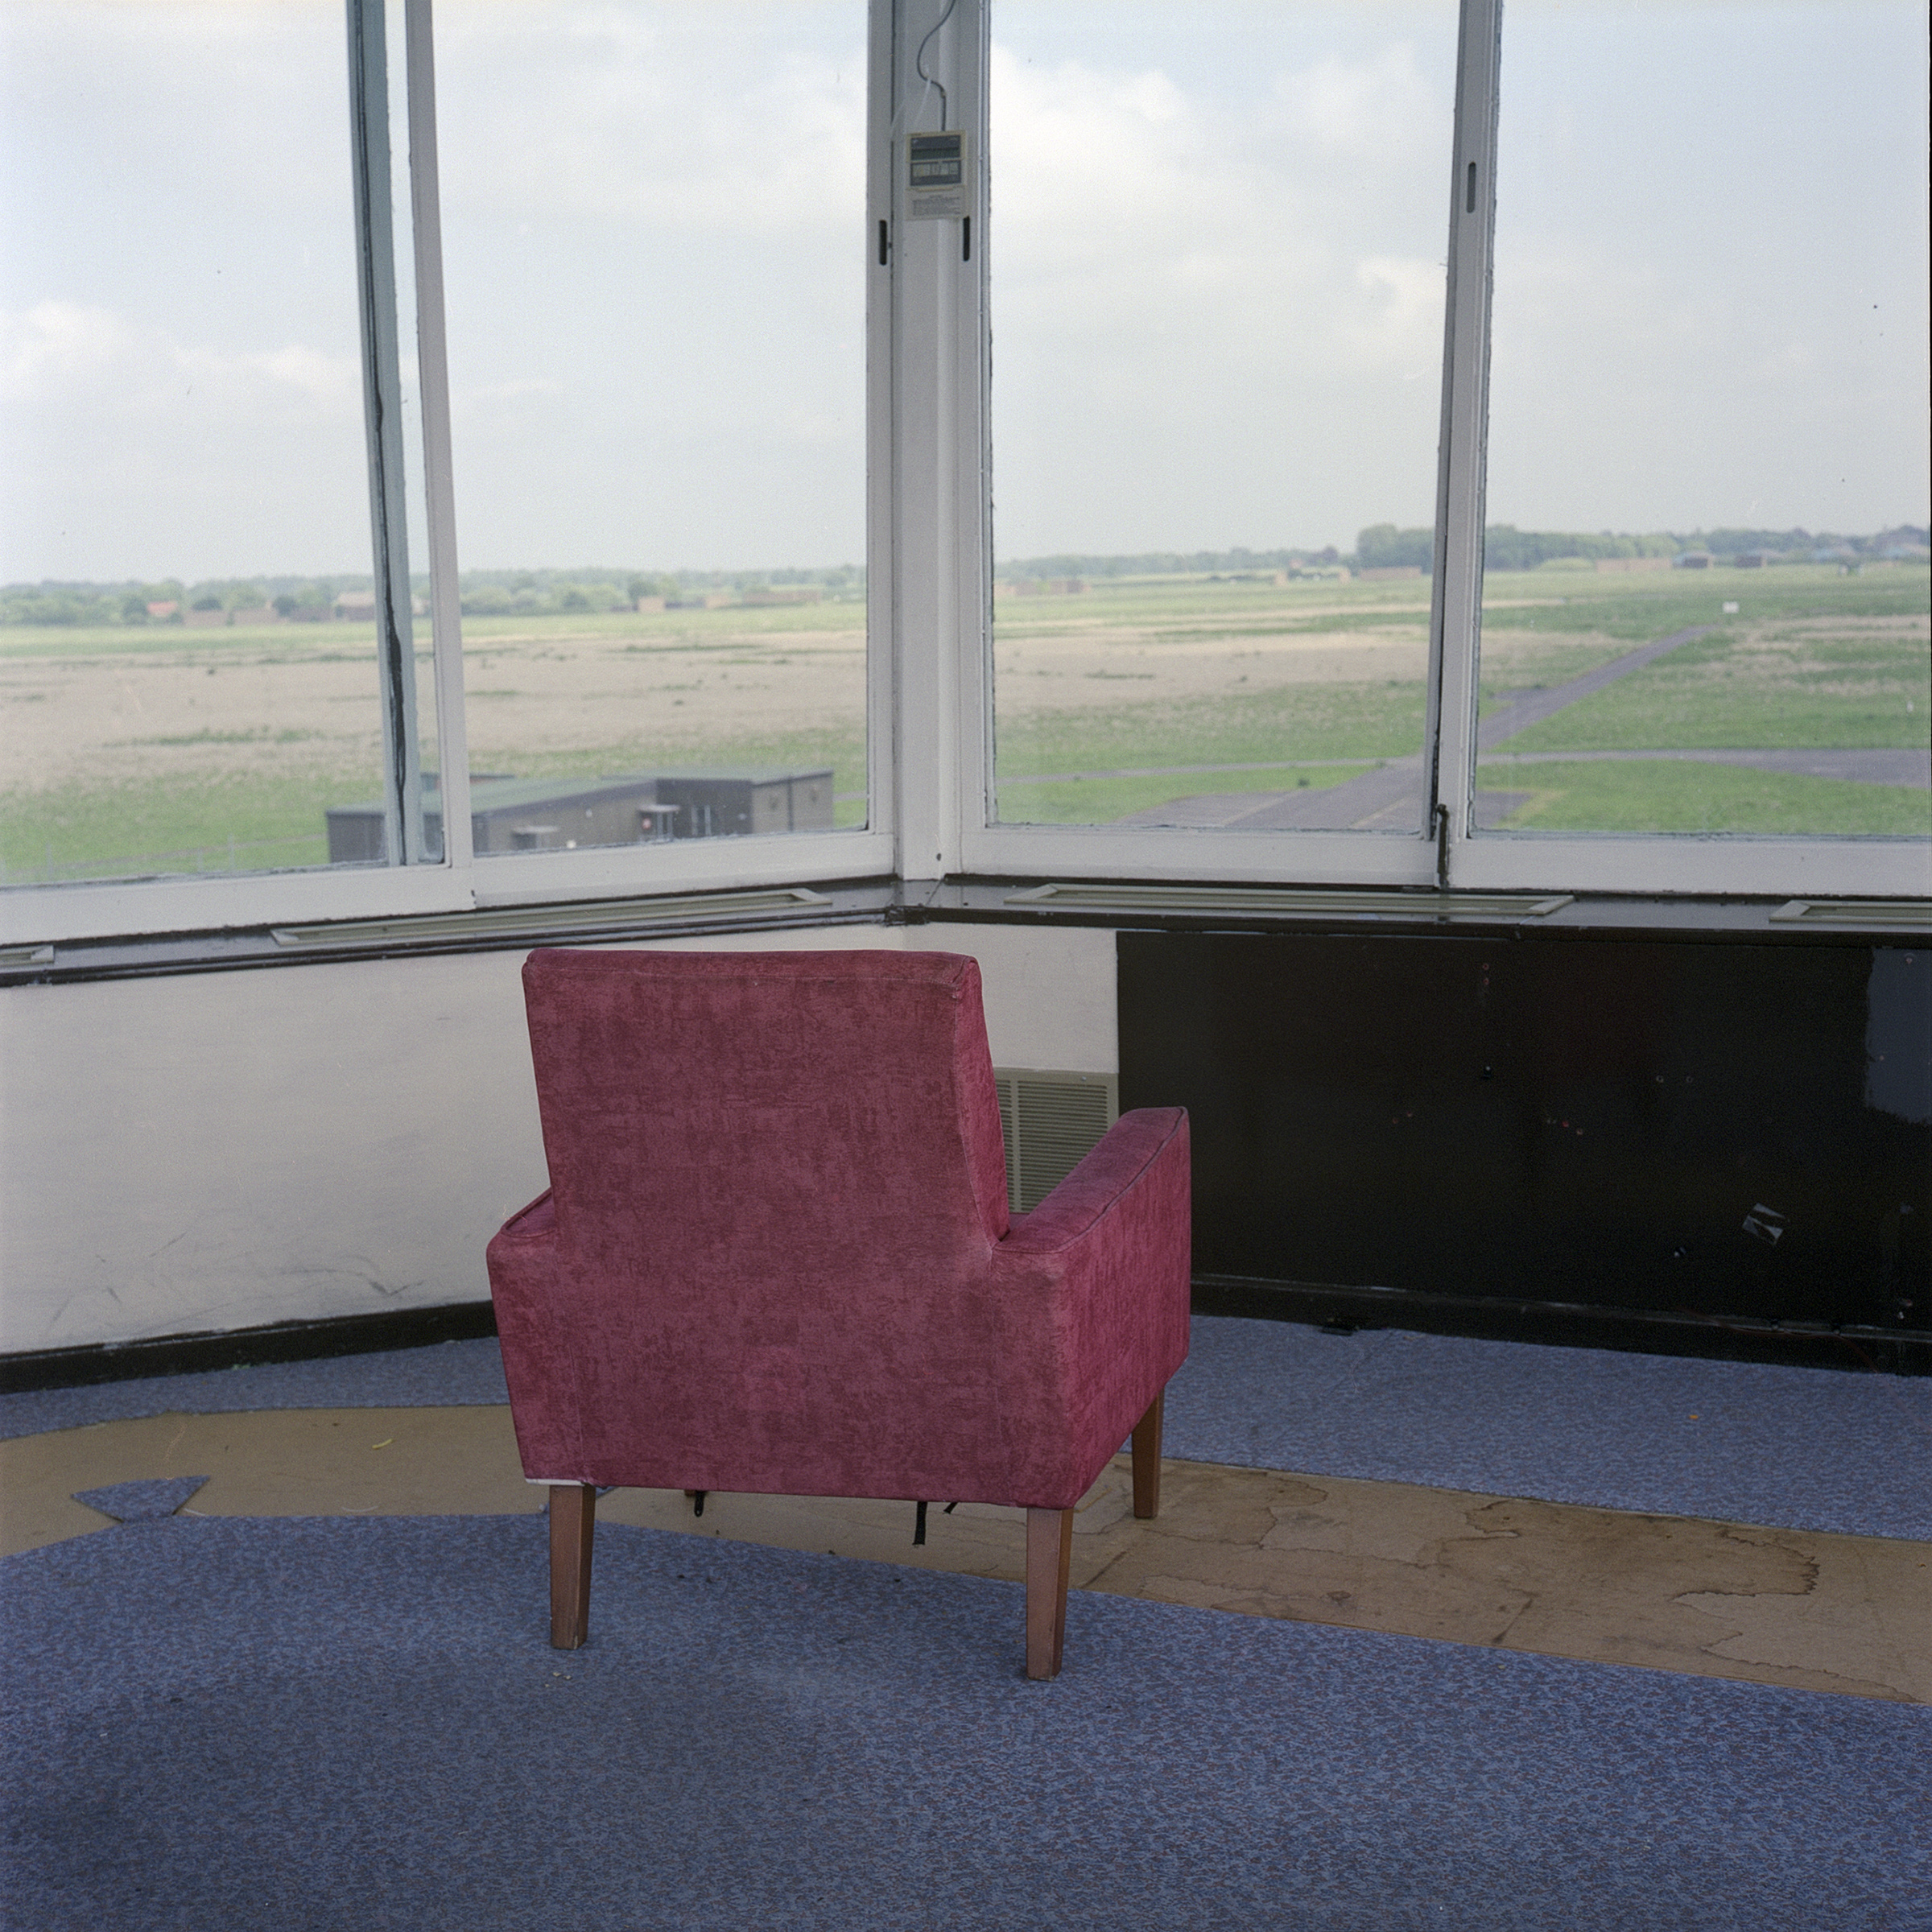 Red chair on blue carpet facing outwards through windows looking out onto airstrip